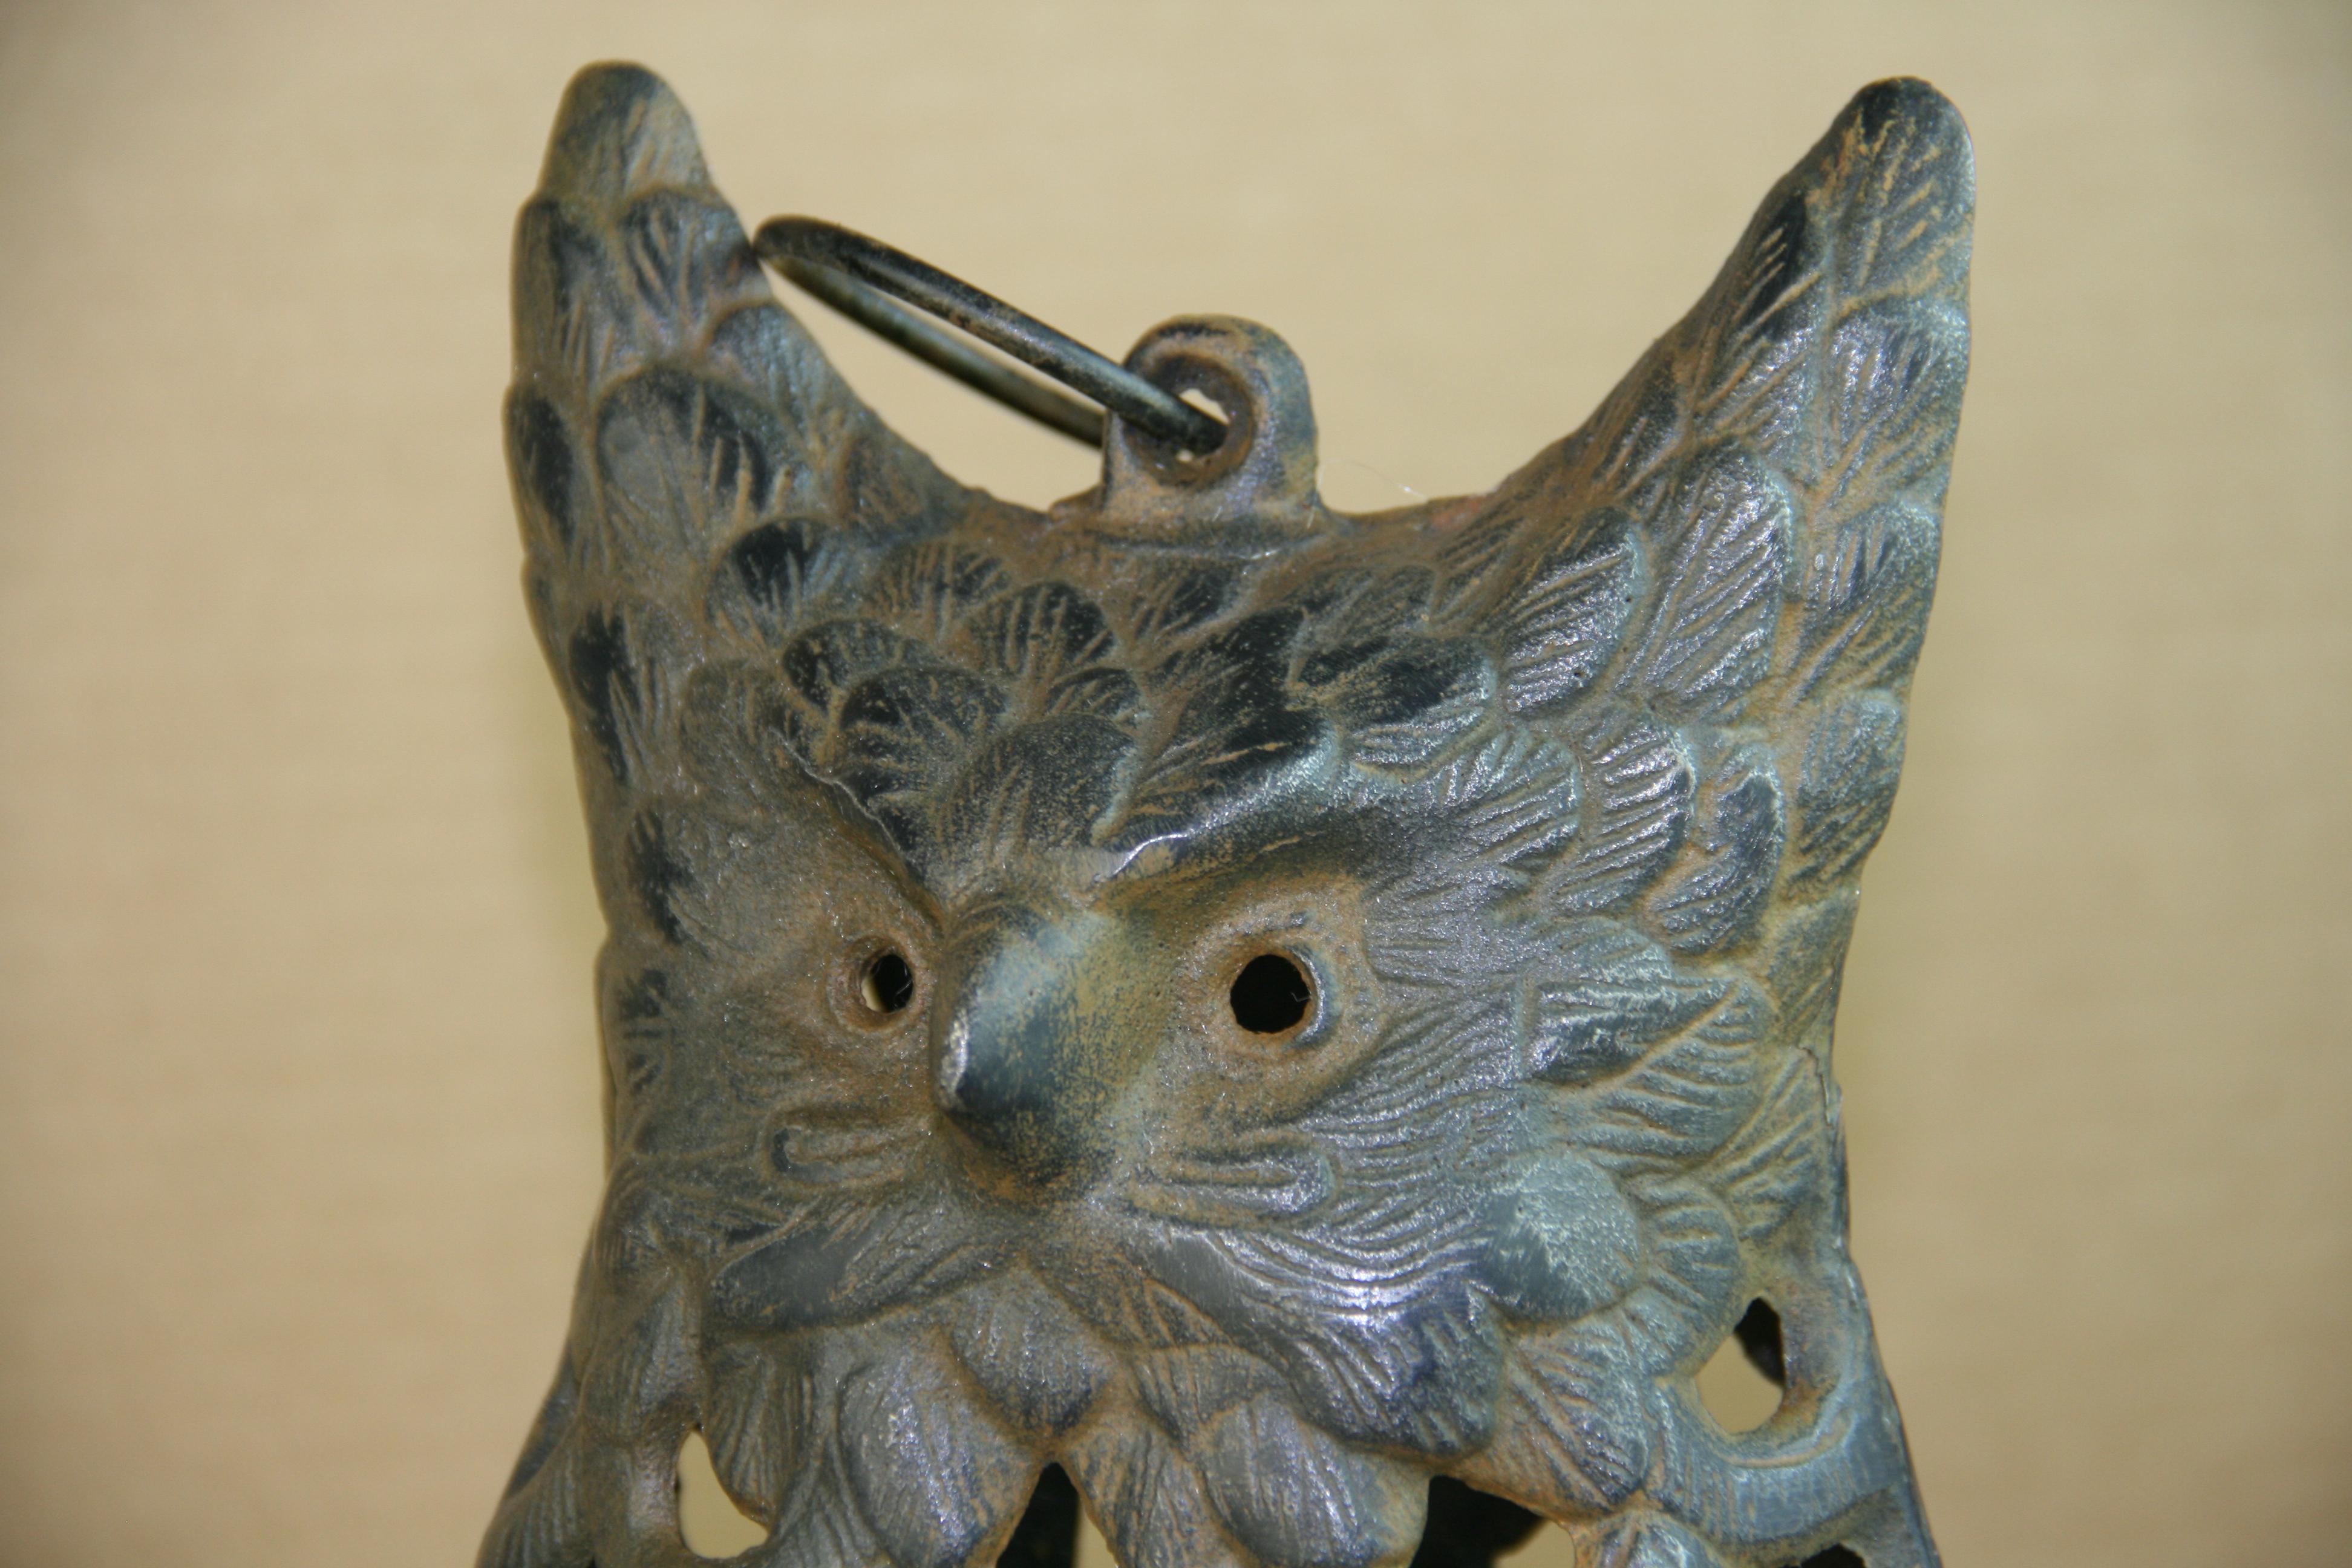 Japanese Rare Oversized Owl Garden Candle Lantern with Antique Chain For Sale 3